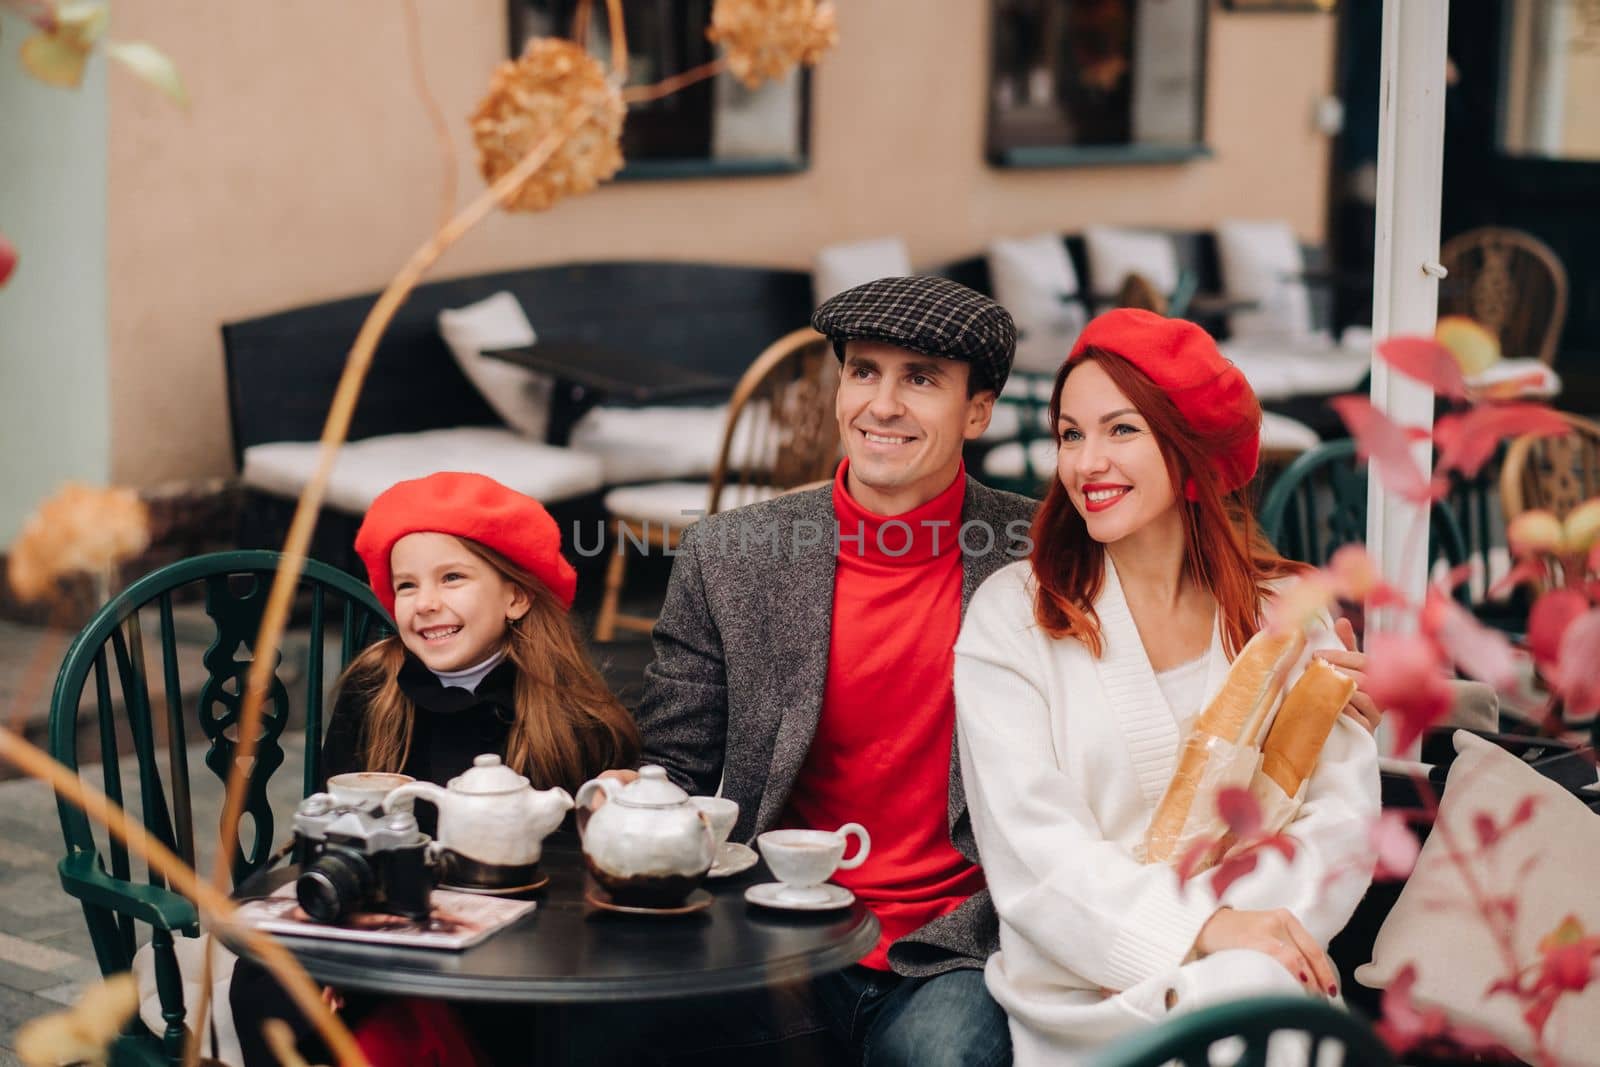 A stylish family gathered together in a cafe on the street. Mom, dad, little daughter drink tea, eat cakes. They are happy together. The concept of a happy family dinner.